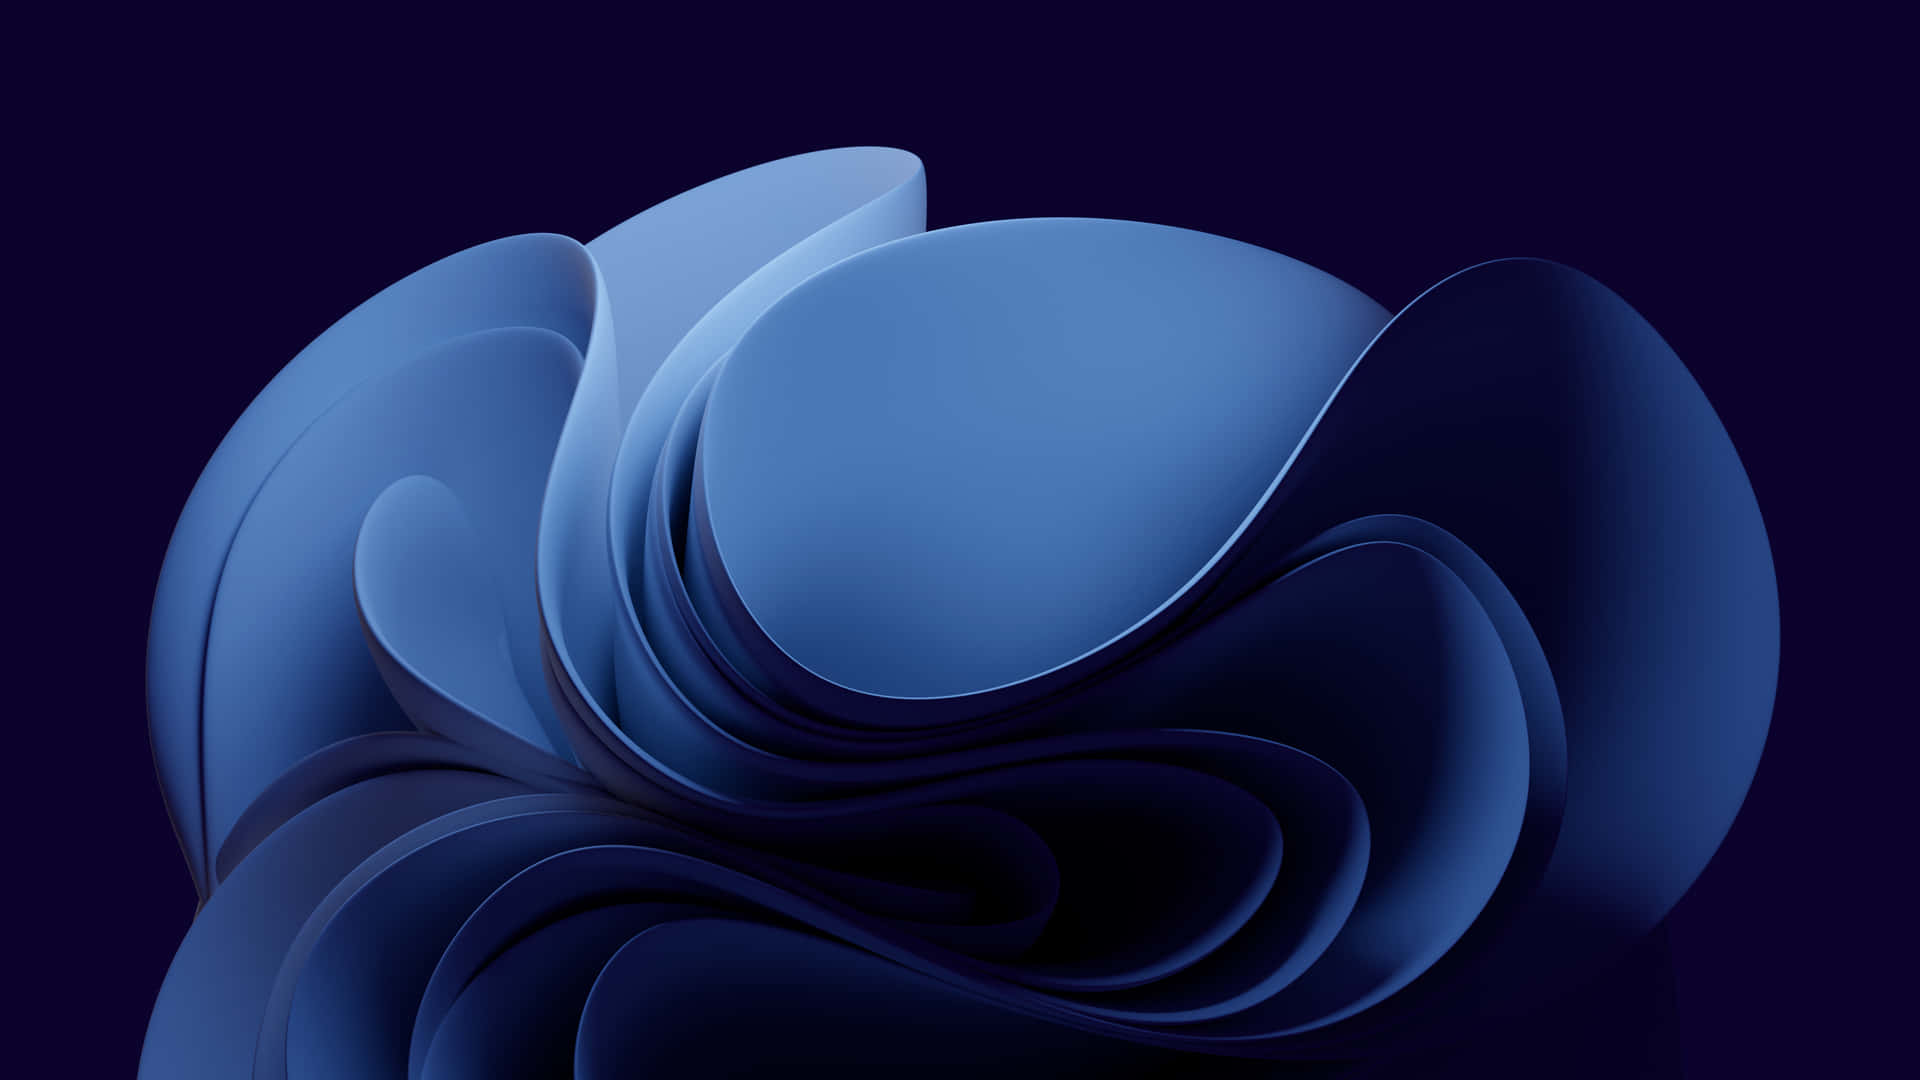 Abstract Blue Abstract Background Wallpaper